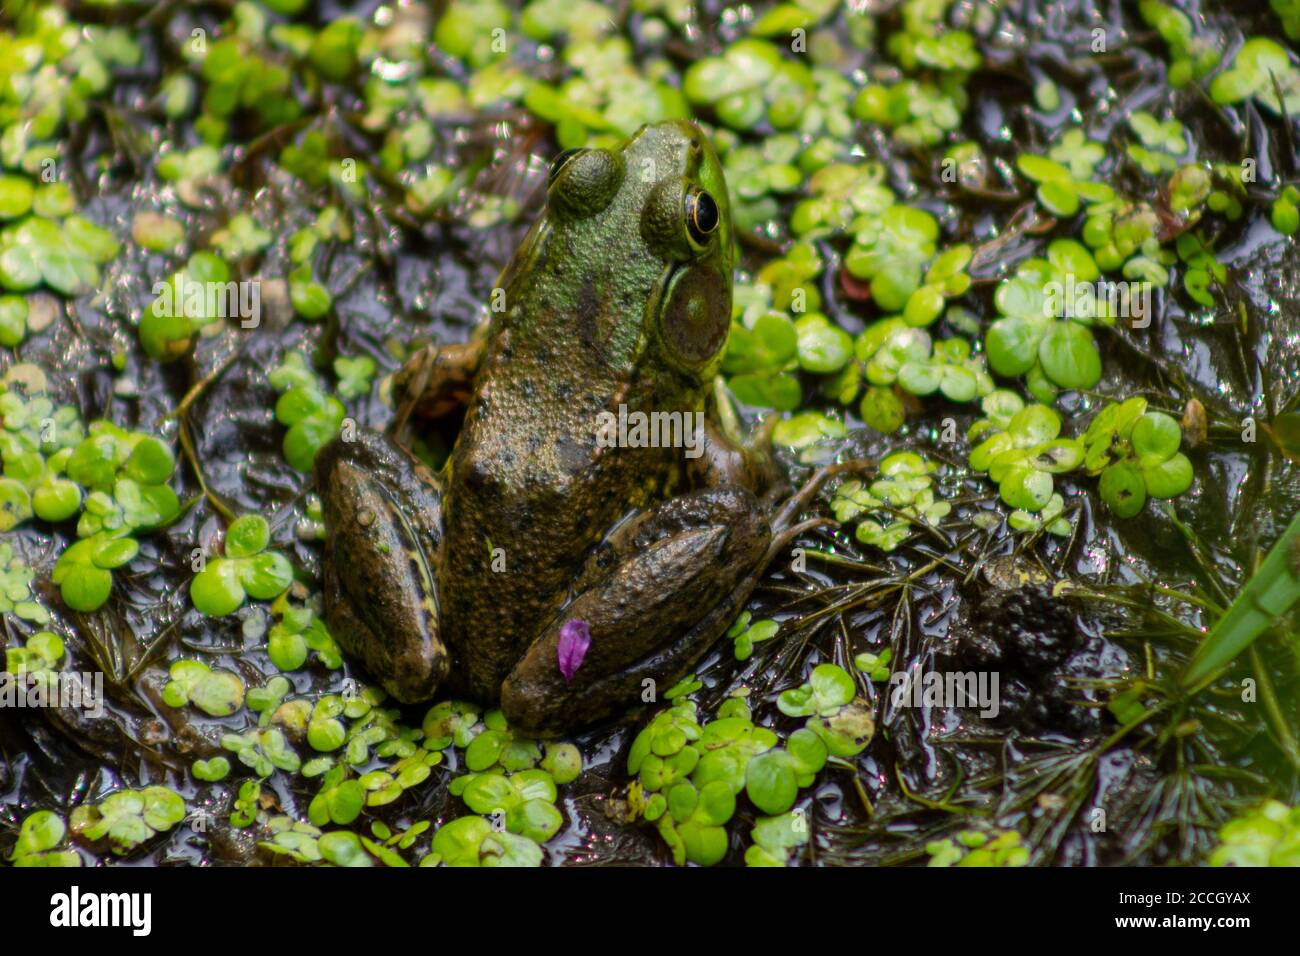 A Green Frog sits among aquatic plants, with a pink petal fallen onto its leg, in the marsh habitat at the New York Botanical Garden. Stock Photo